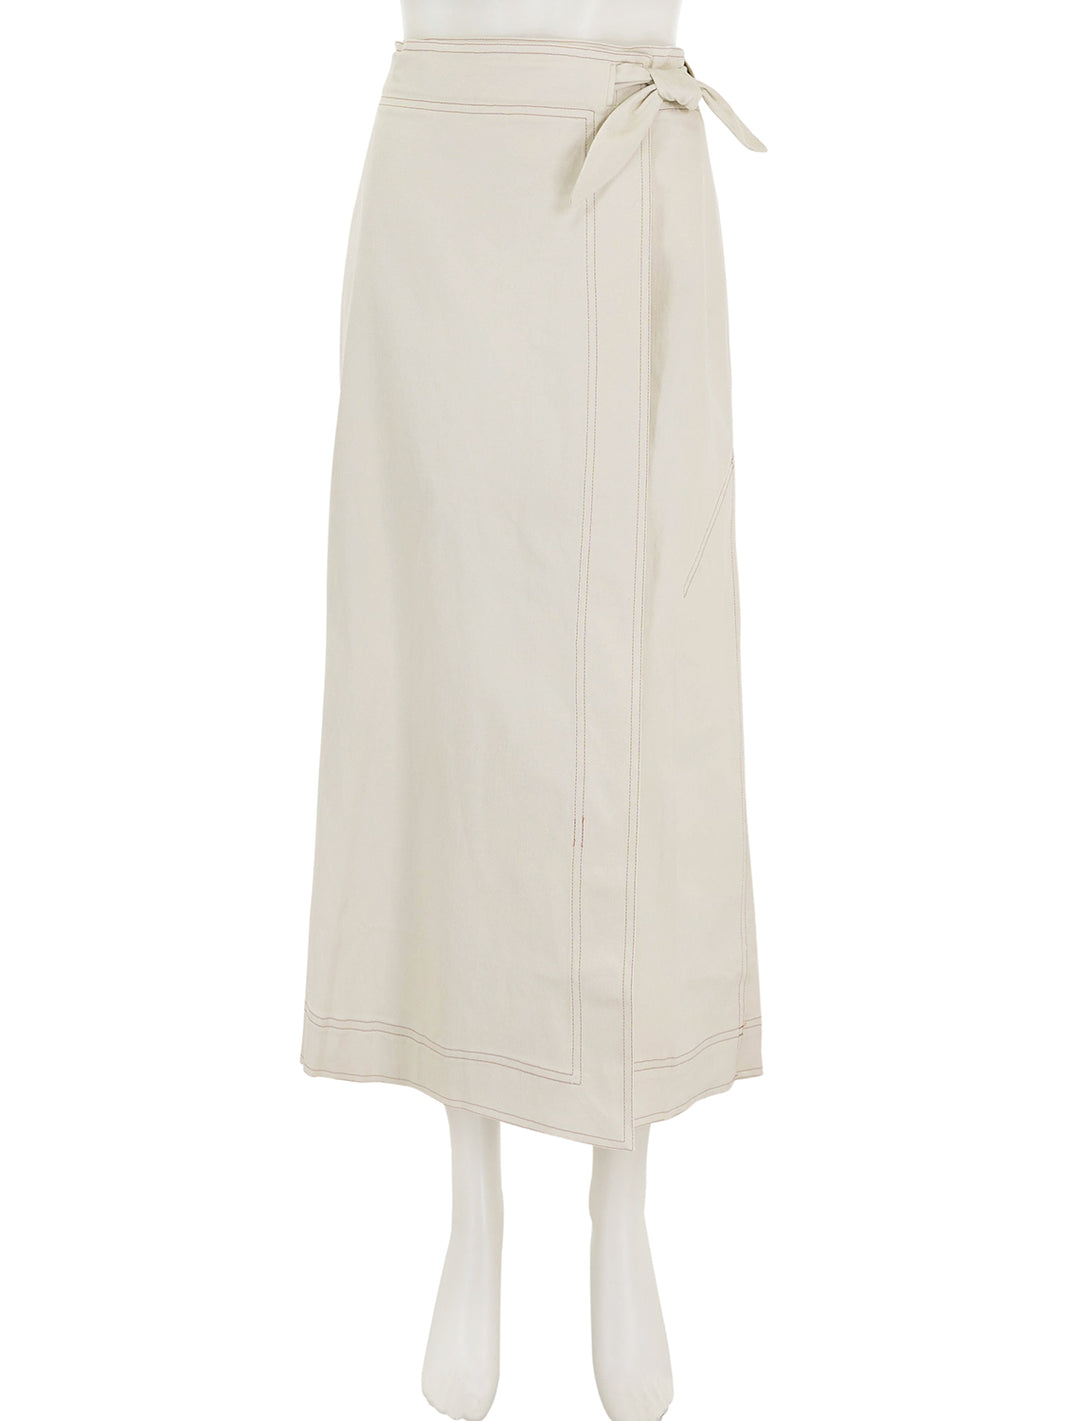 Front view of GANNI's herringbone canvas long wrap skirt in summer sand.